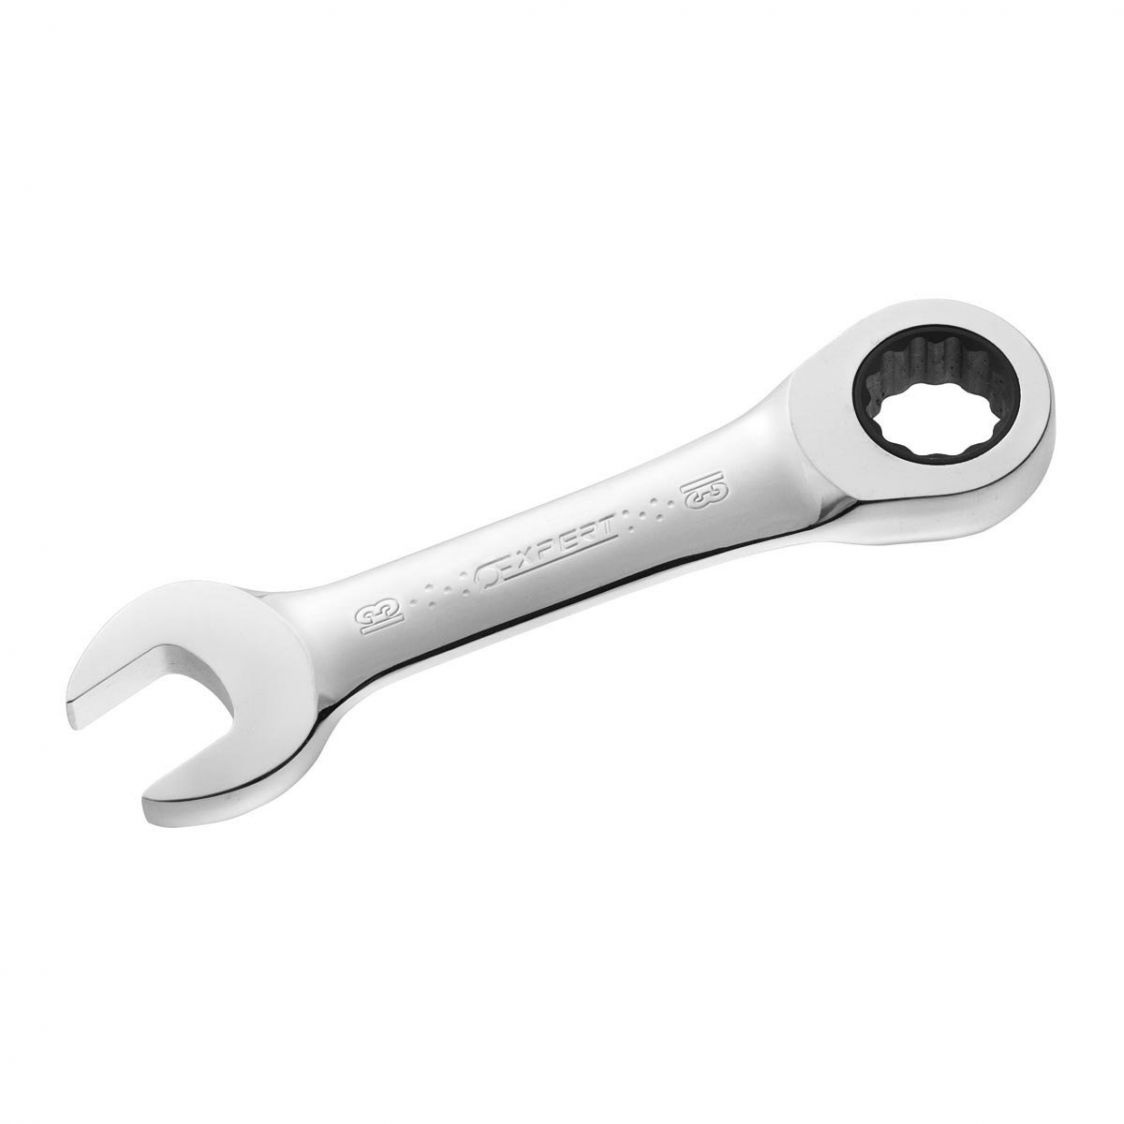 EXPERT by FACOM E110921 - 17mm Metric Stubby Ratchet Combination Spanner